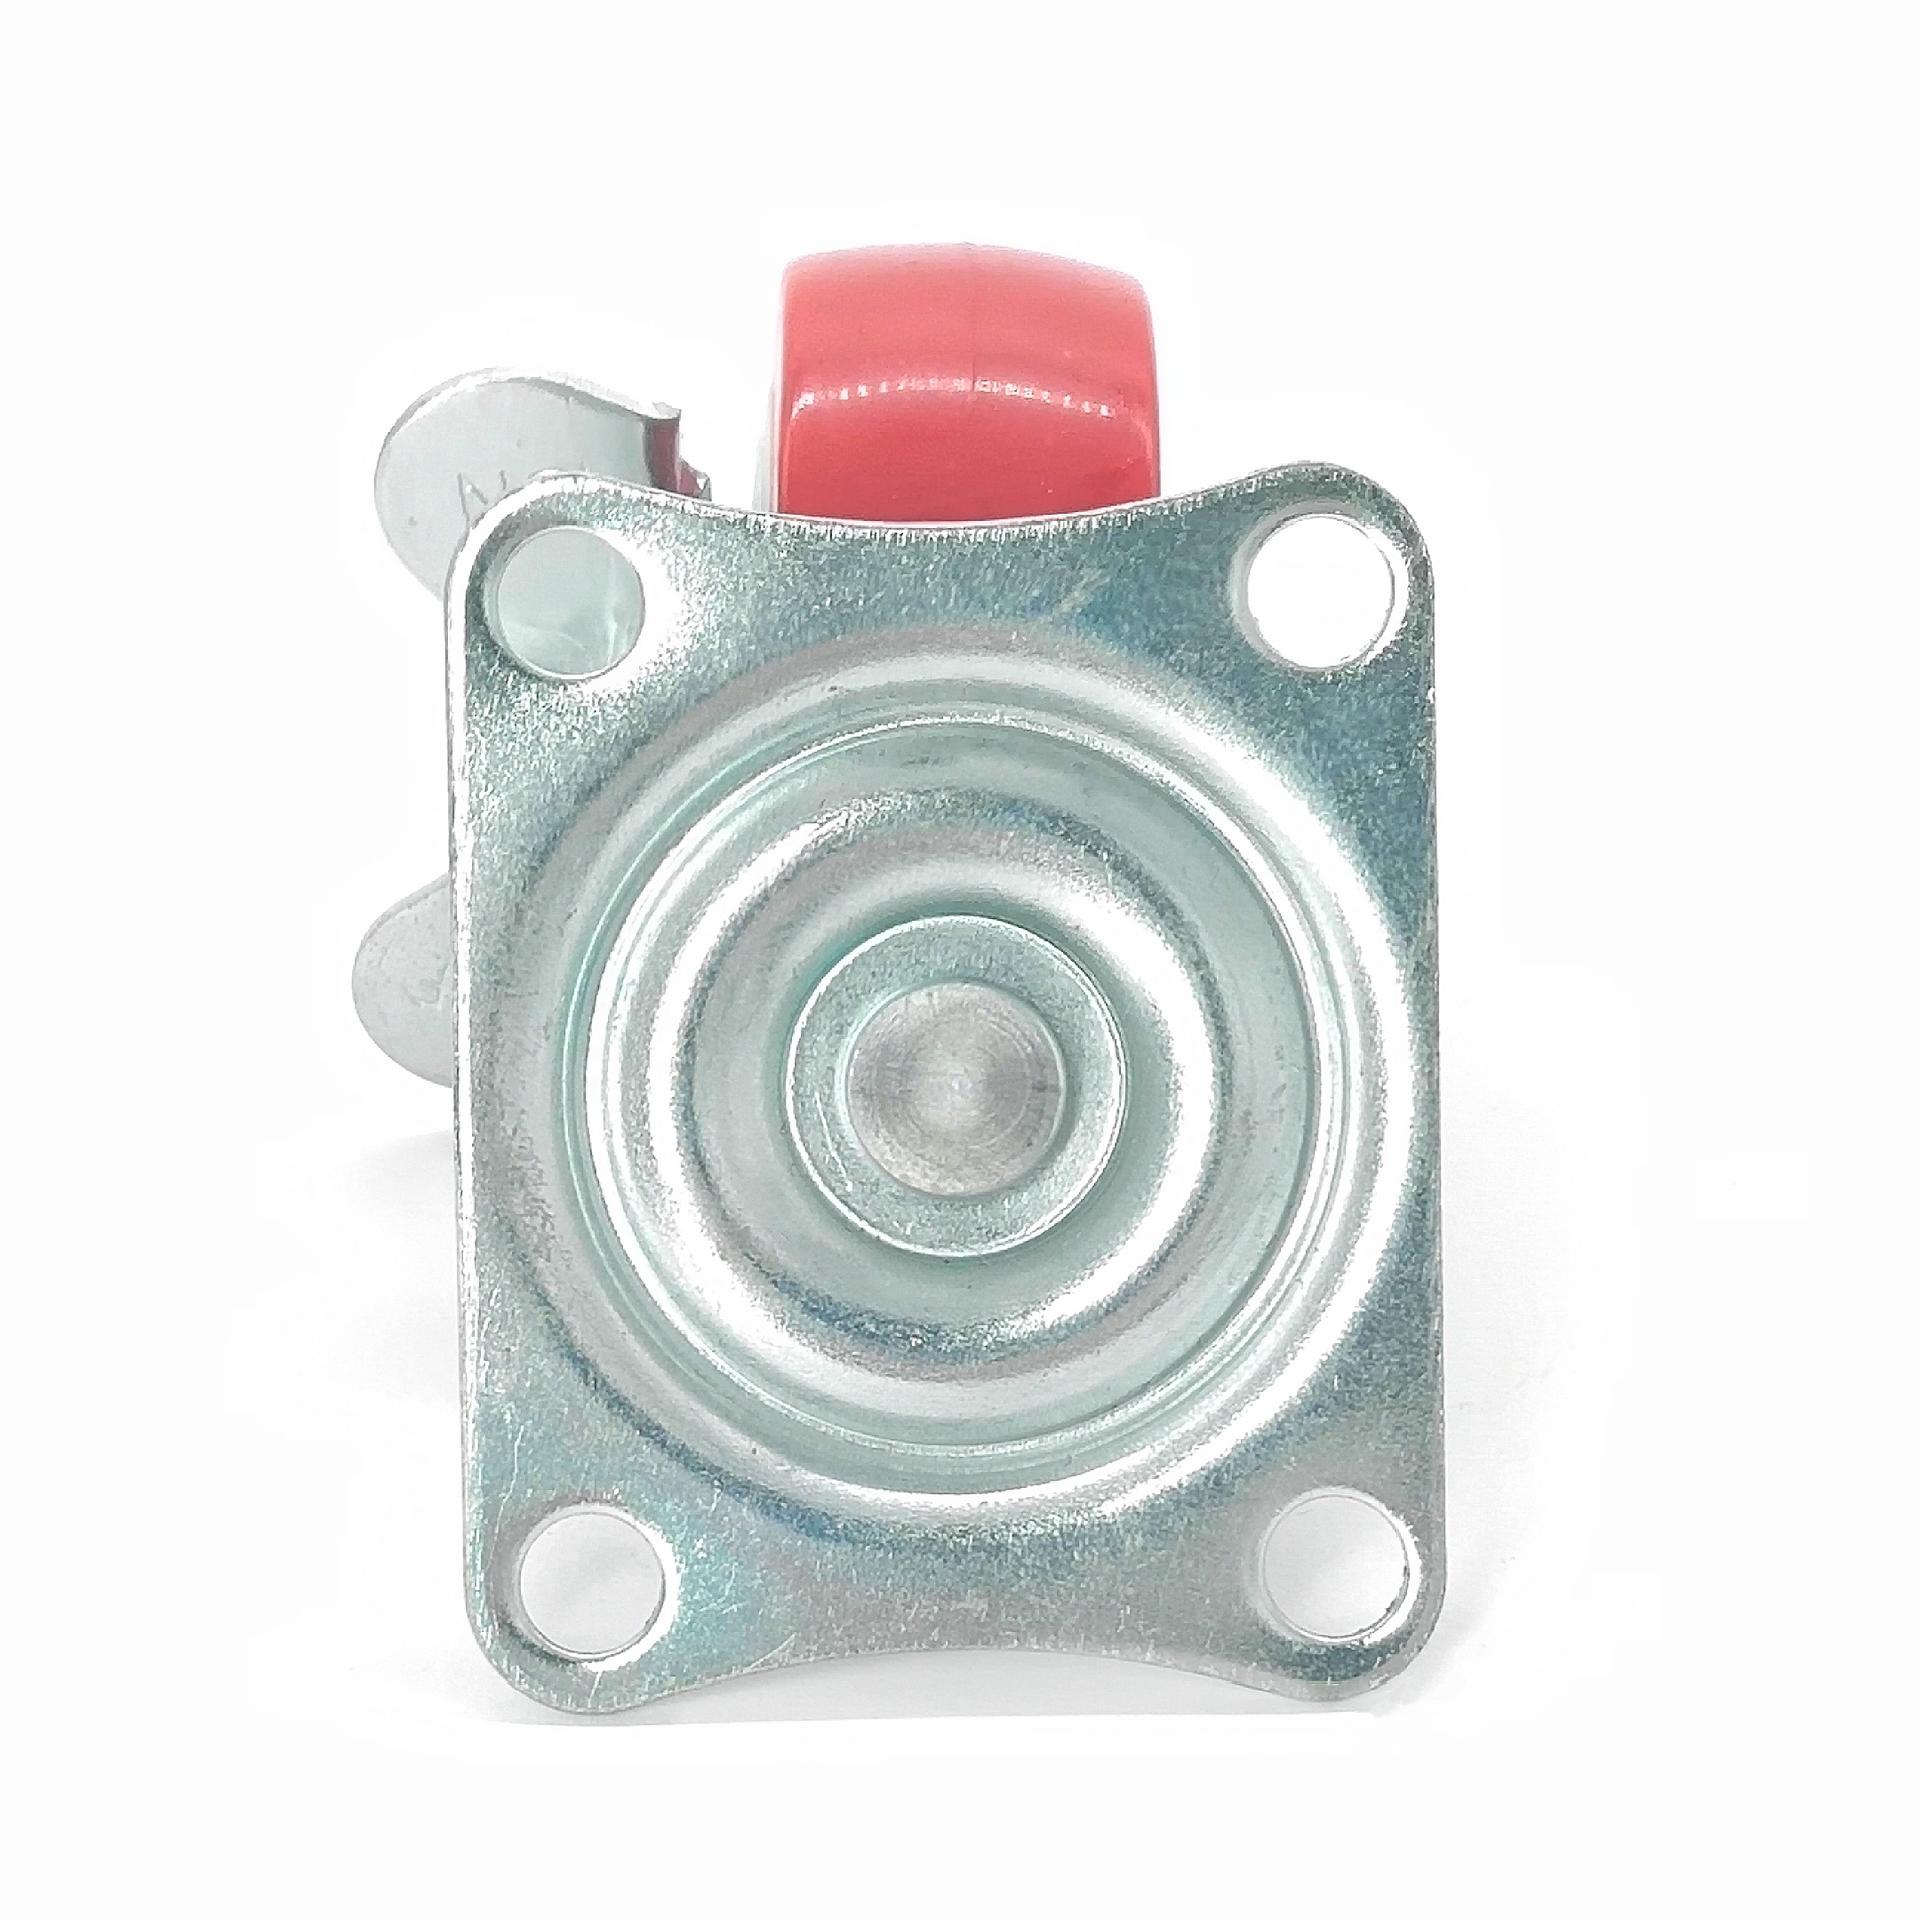 1.5,2,2.5 inch furniture caster wheel with brake wholesales